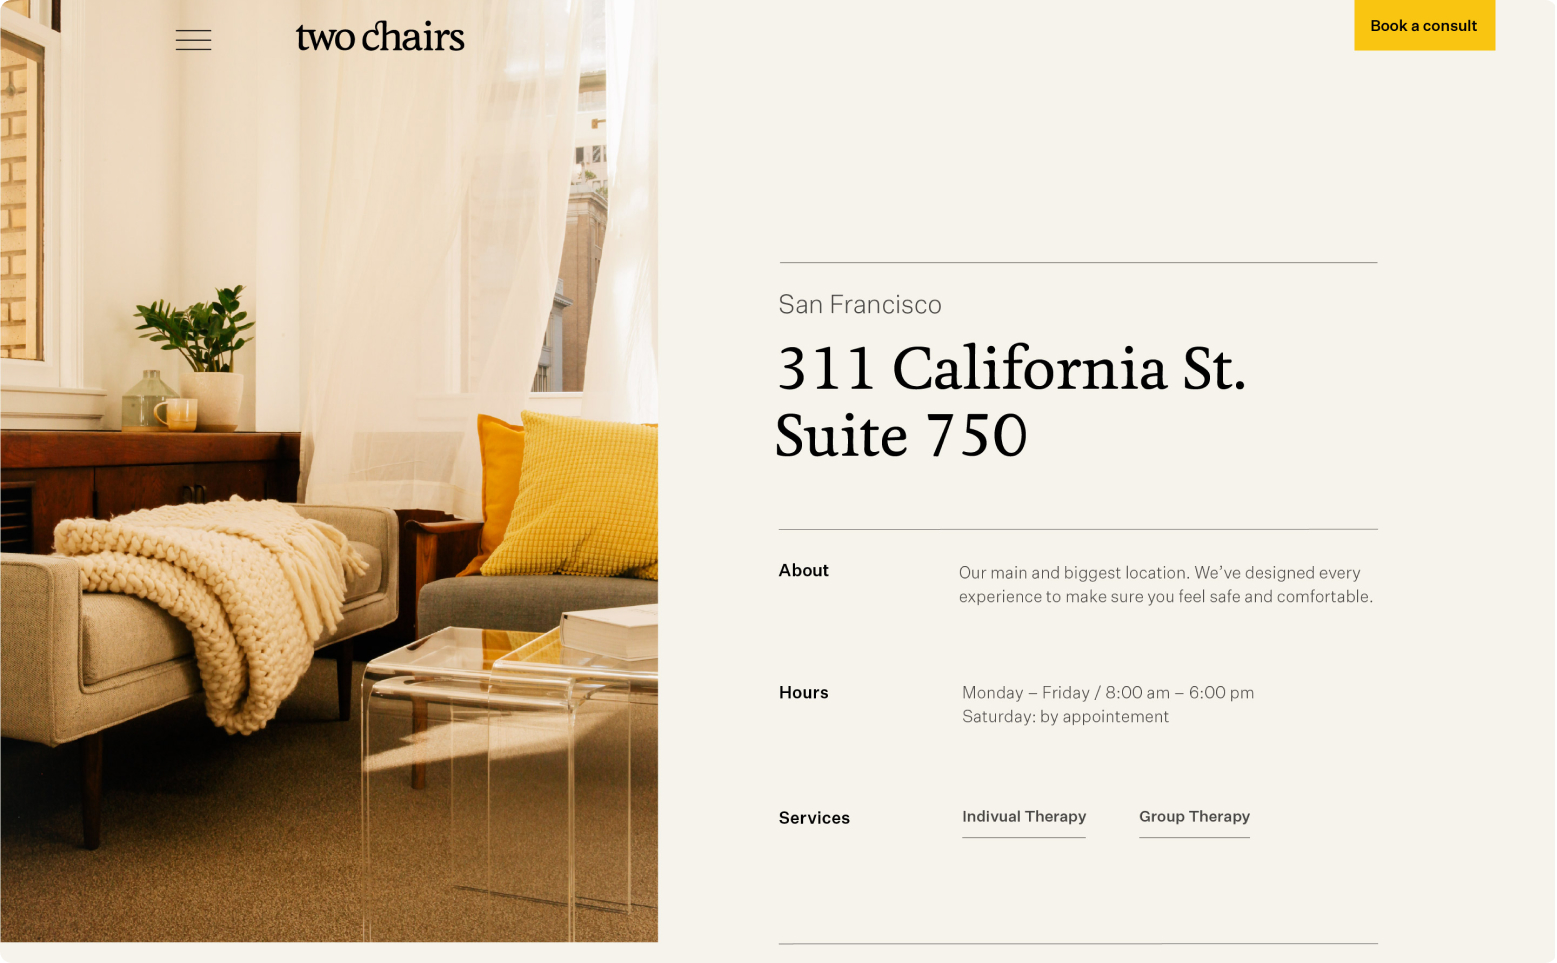 Screenshot of a Two Chairs location webpage.